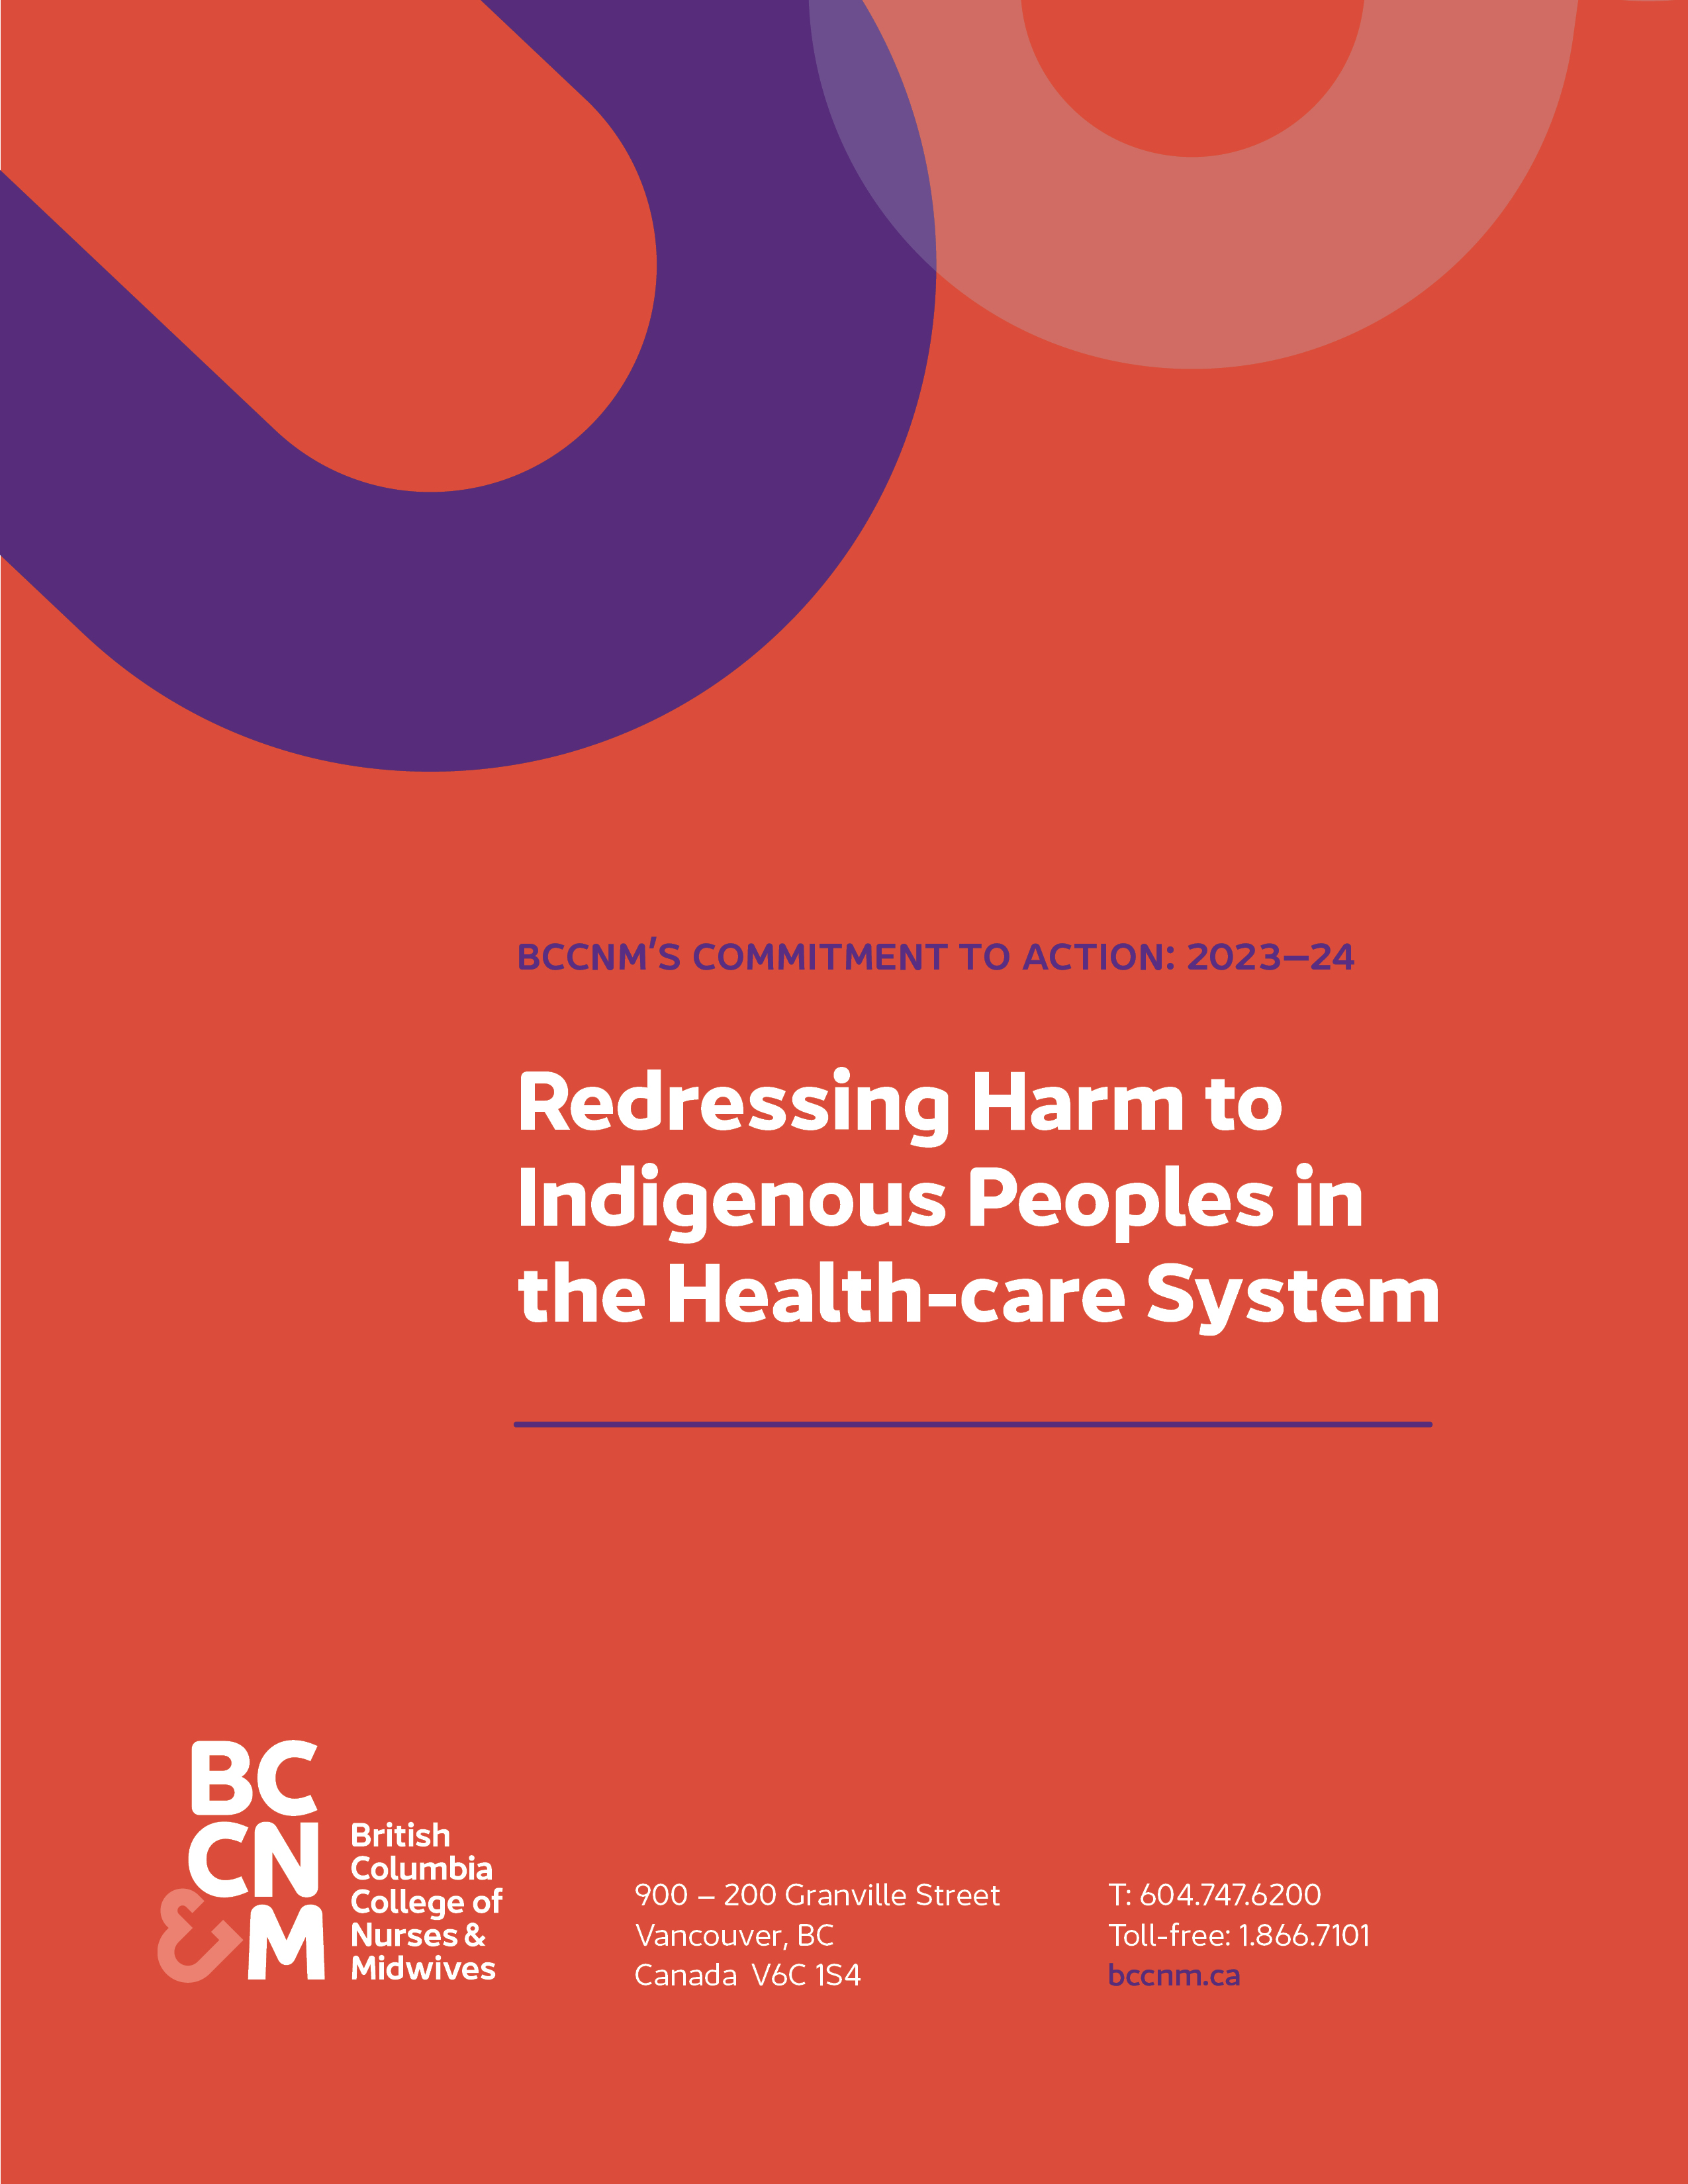 Redressing Harm to Indigenous Peoples in the Health-care System